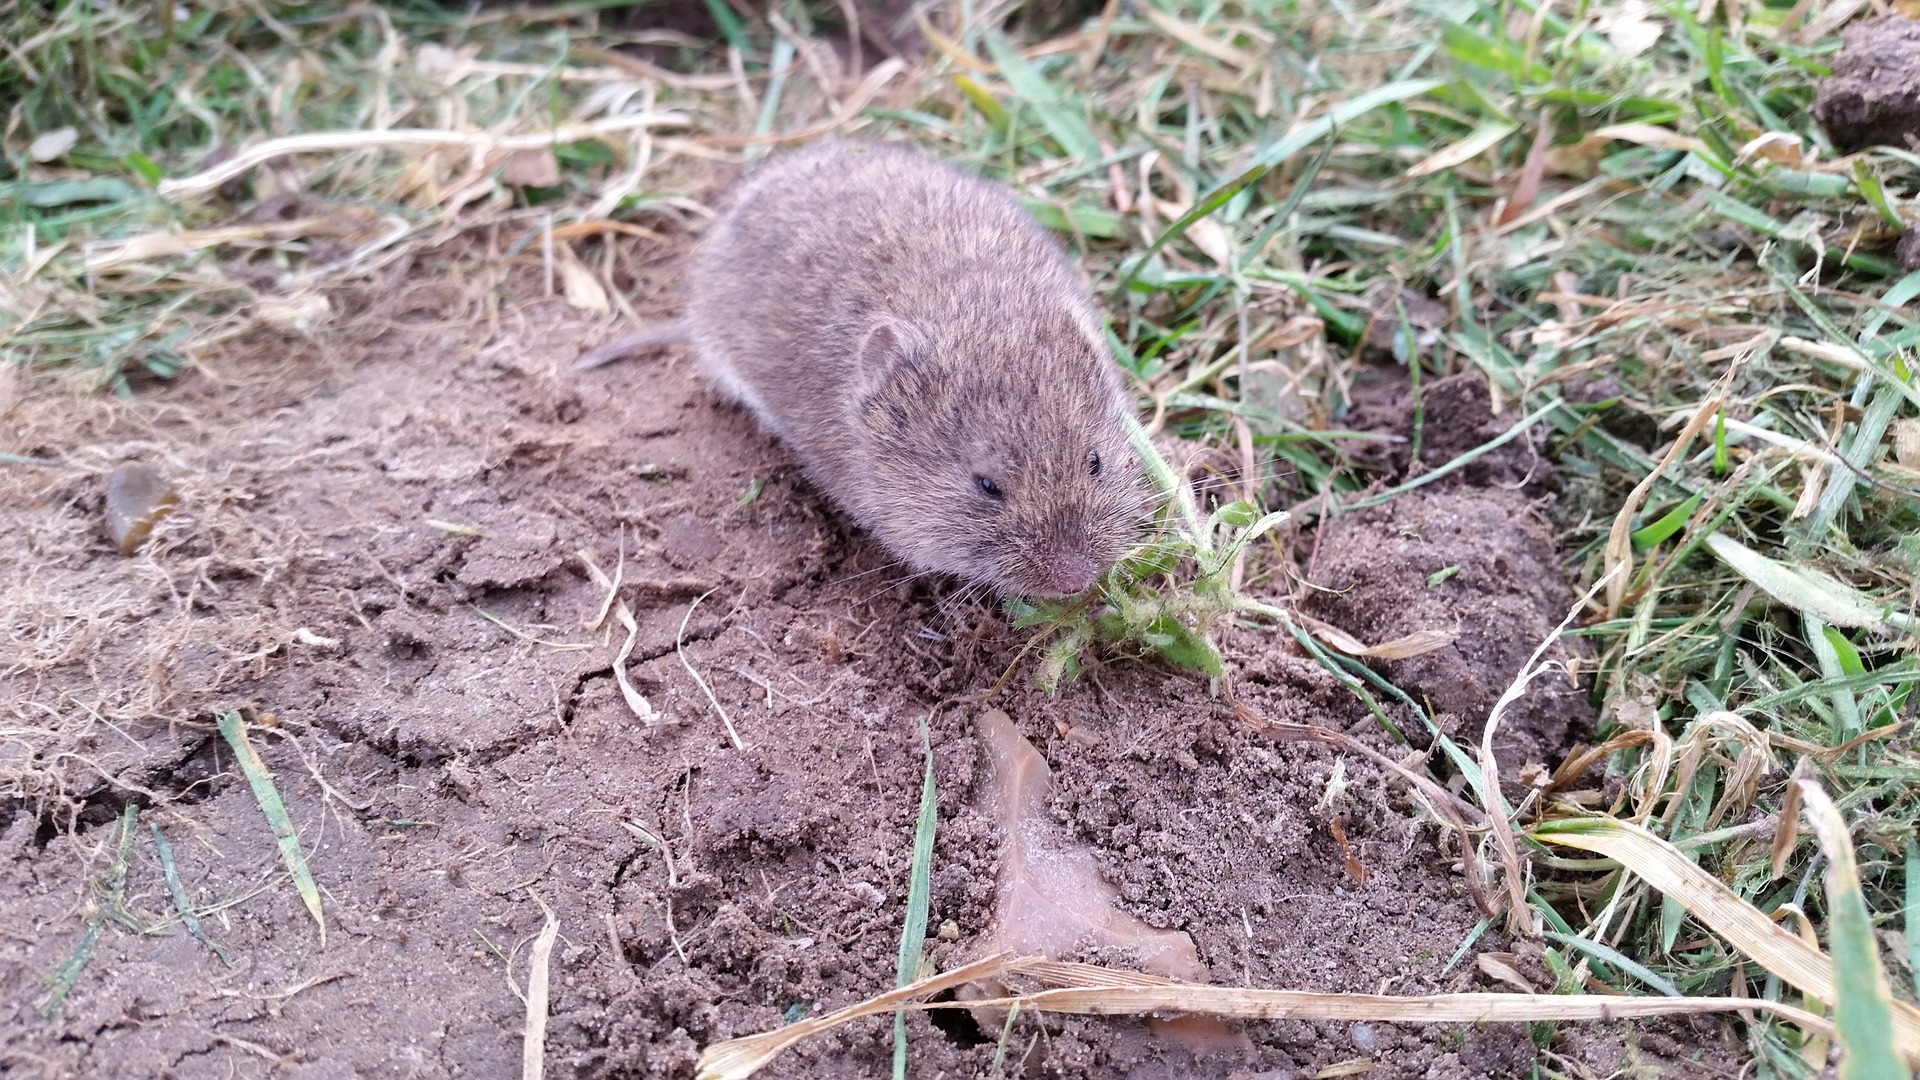 Voles: How to Identity and Get Rid of Voles in the Garden | The Old